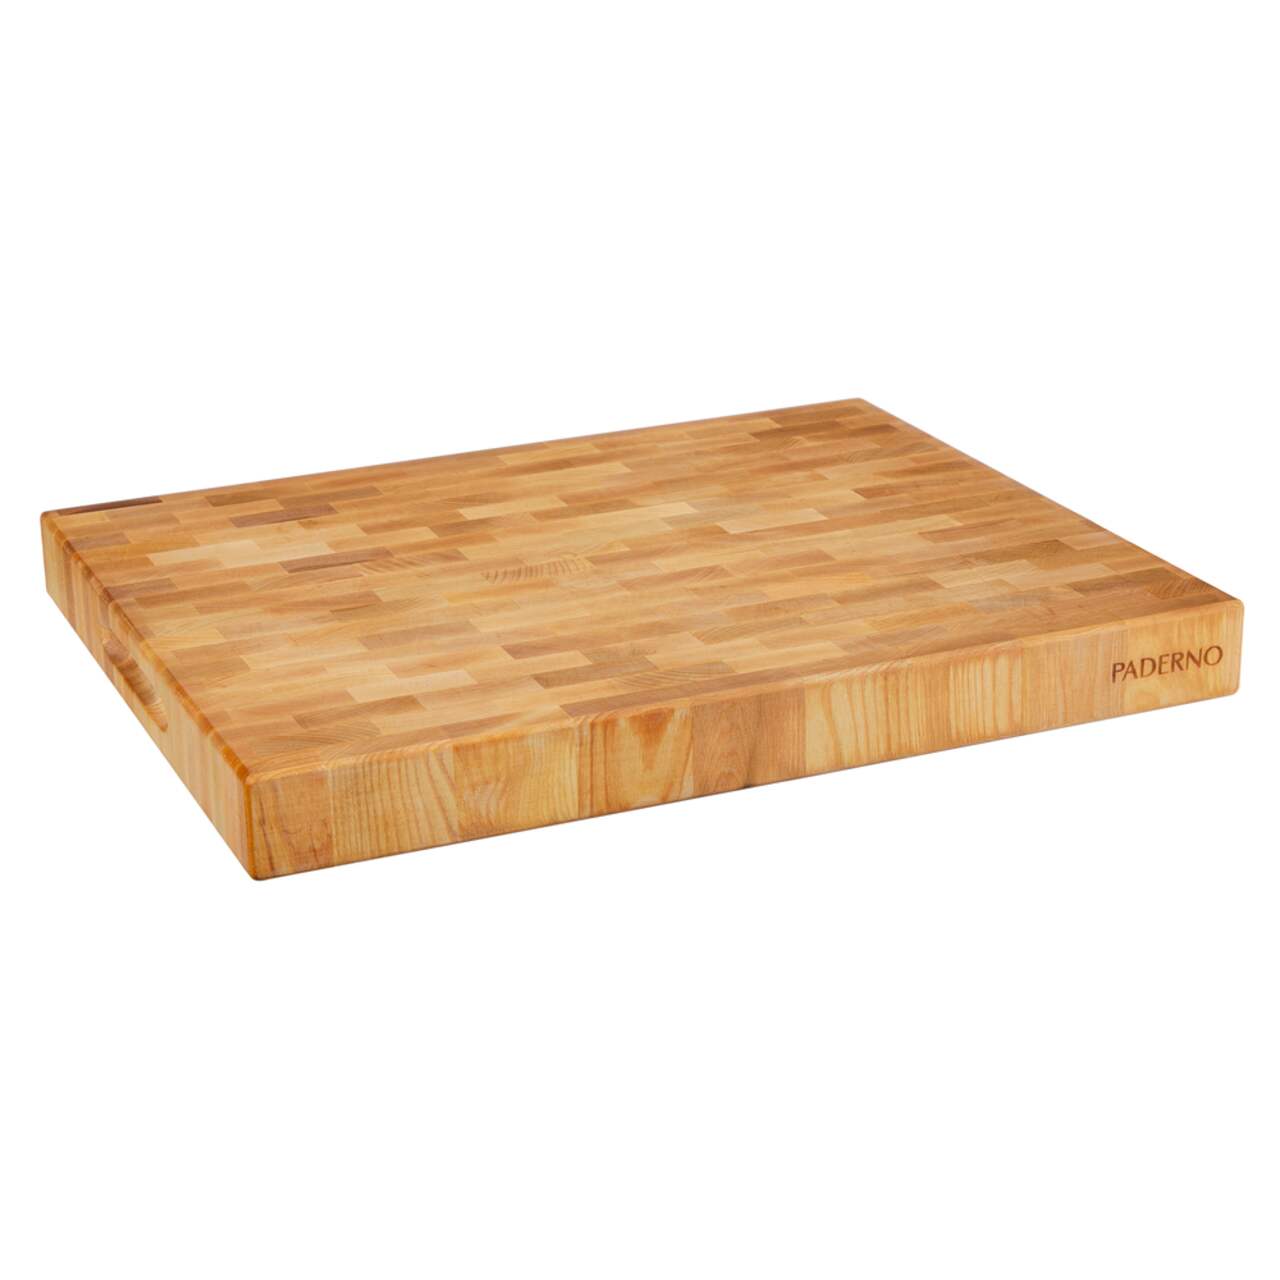 PADERNO Maple Butcher Block Cutting Board, Skid-Resistant, 16-in x